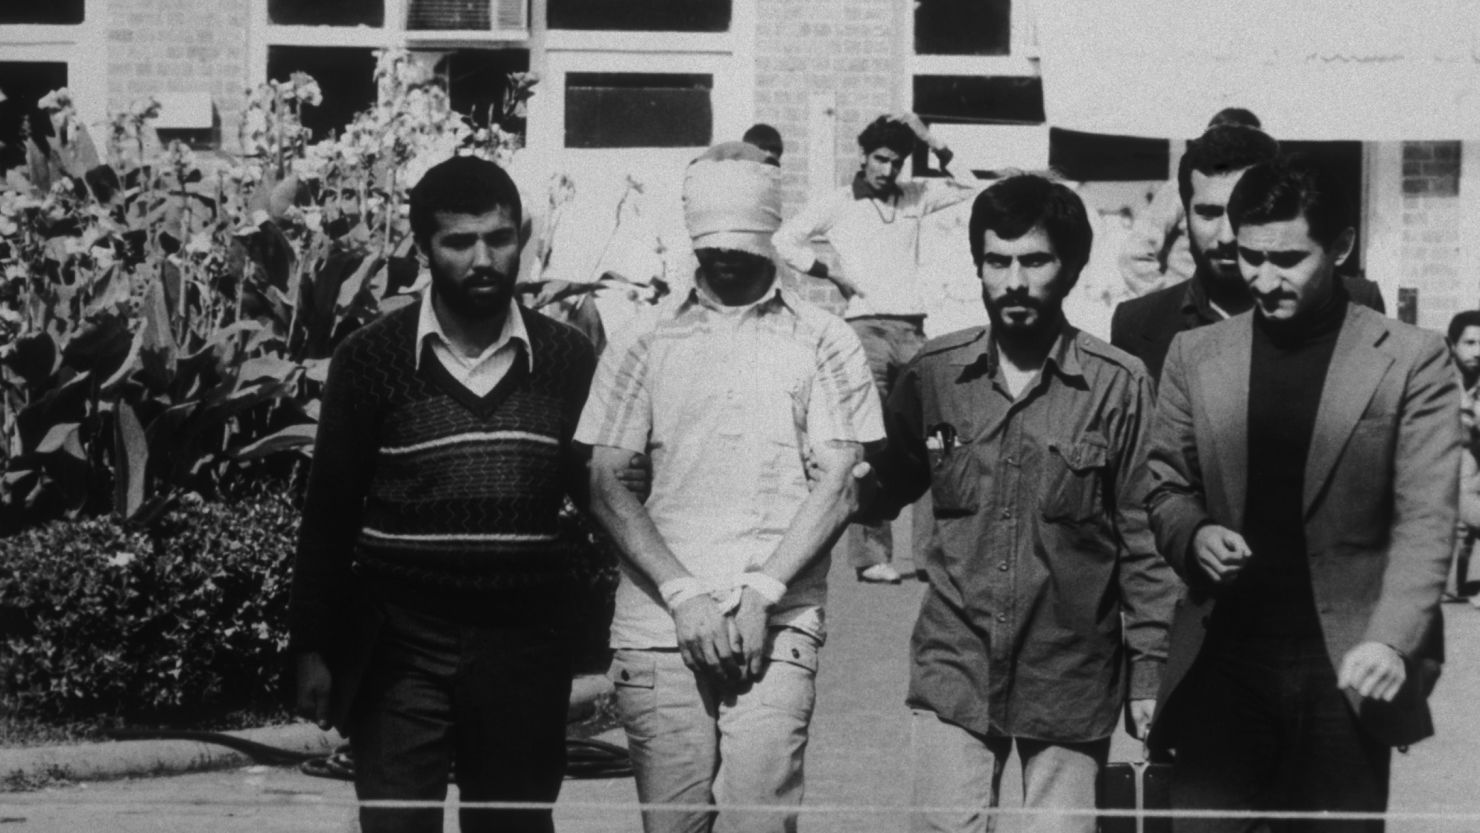 An American hostage being paraded before the cameras by his Iranian captors. Following the Iranian revolution over fifty American hostages were taken and only released after four hundred and forty-four days.